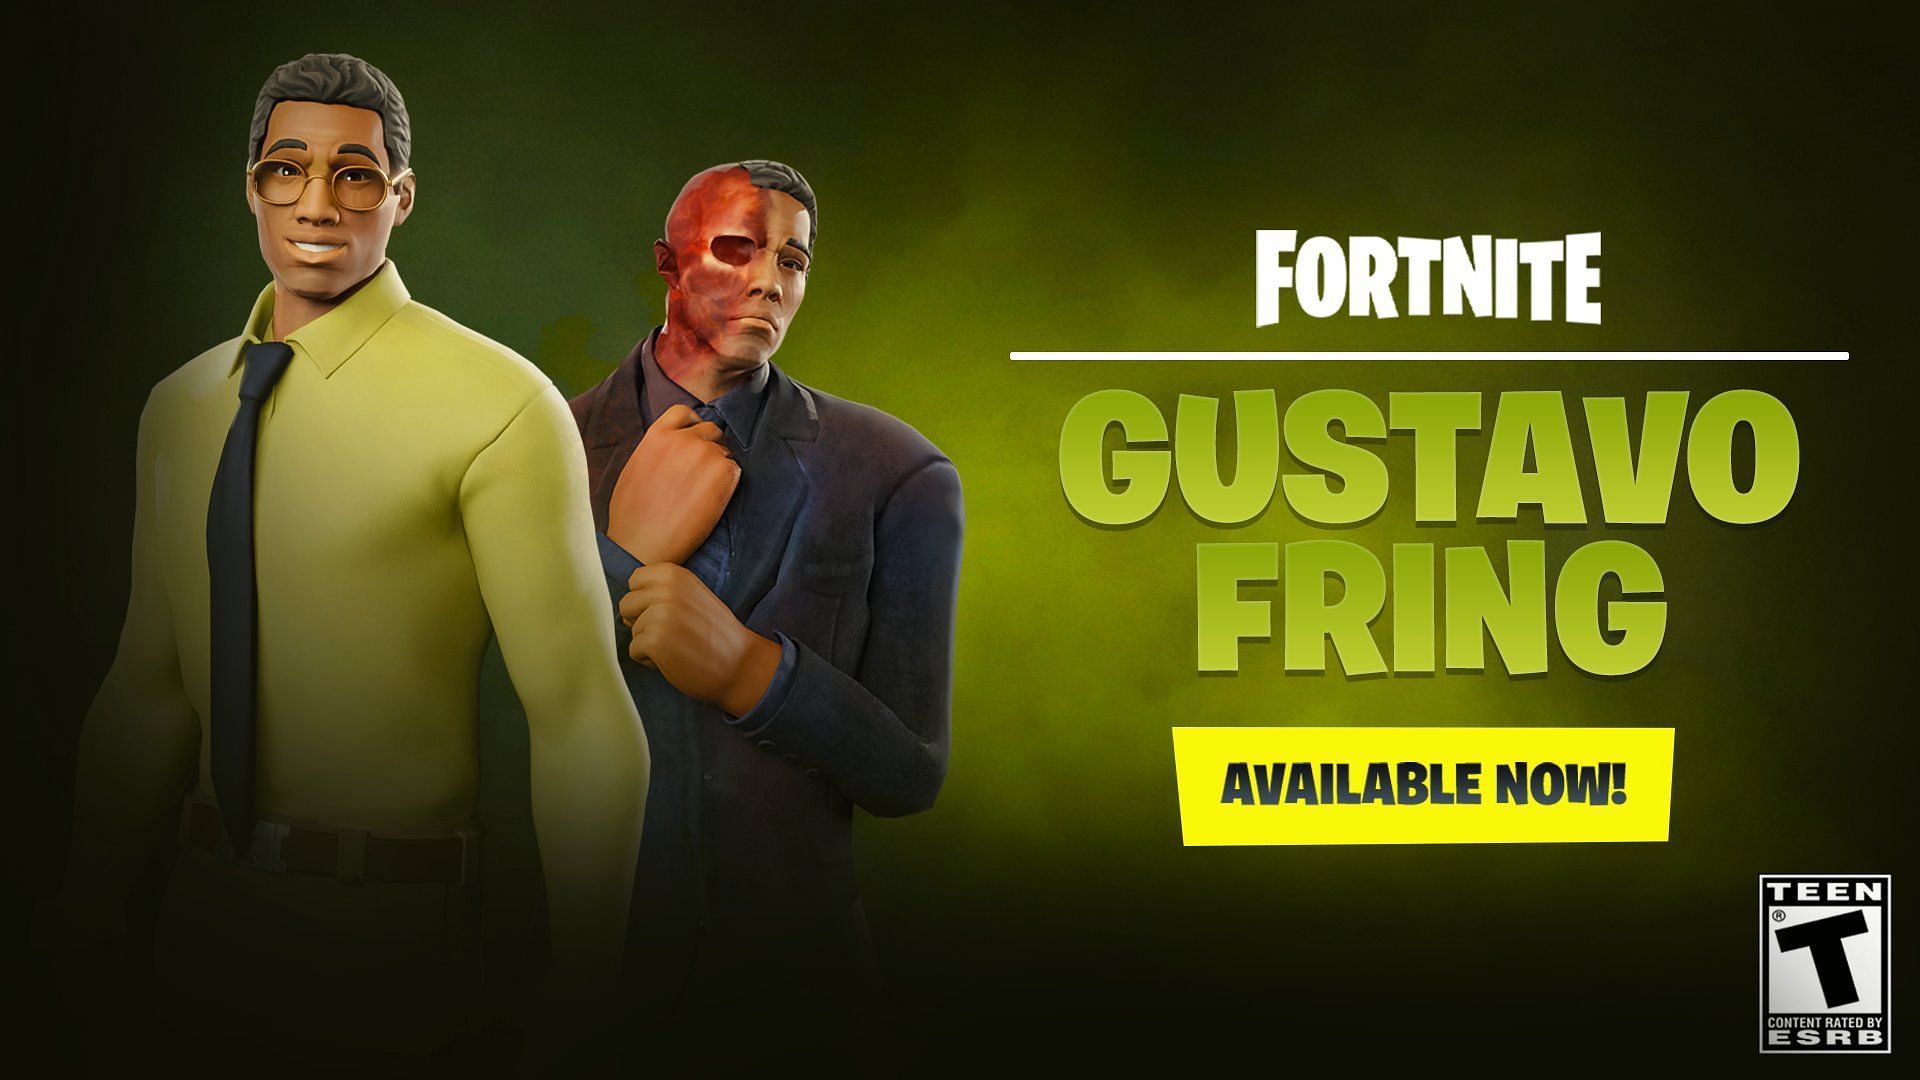 Gustavo Fring as a Fortnite character would be interesting to say the least (Image via Twitter/hxzsh)